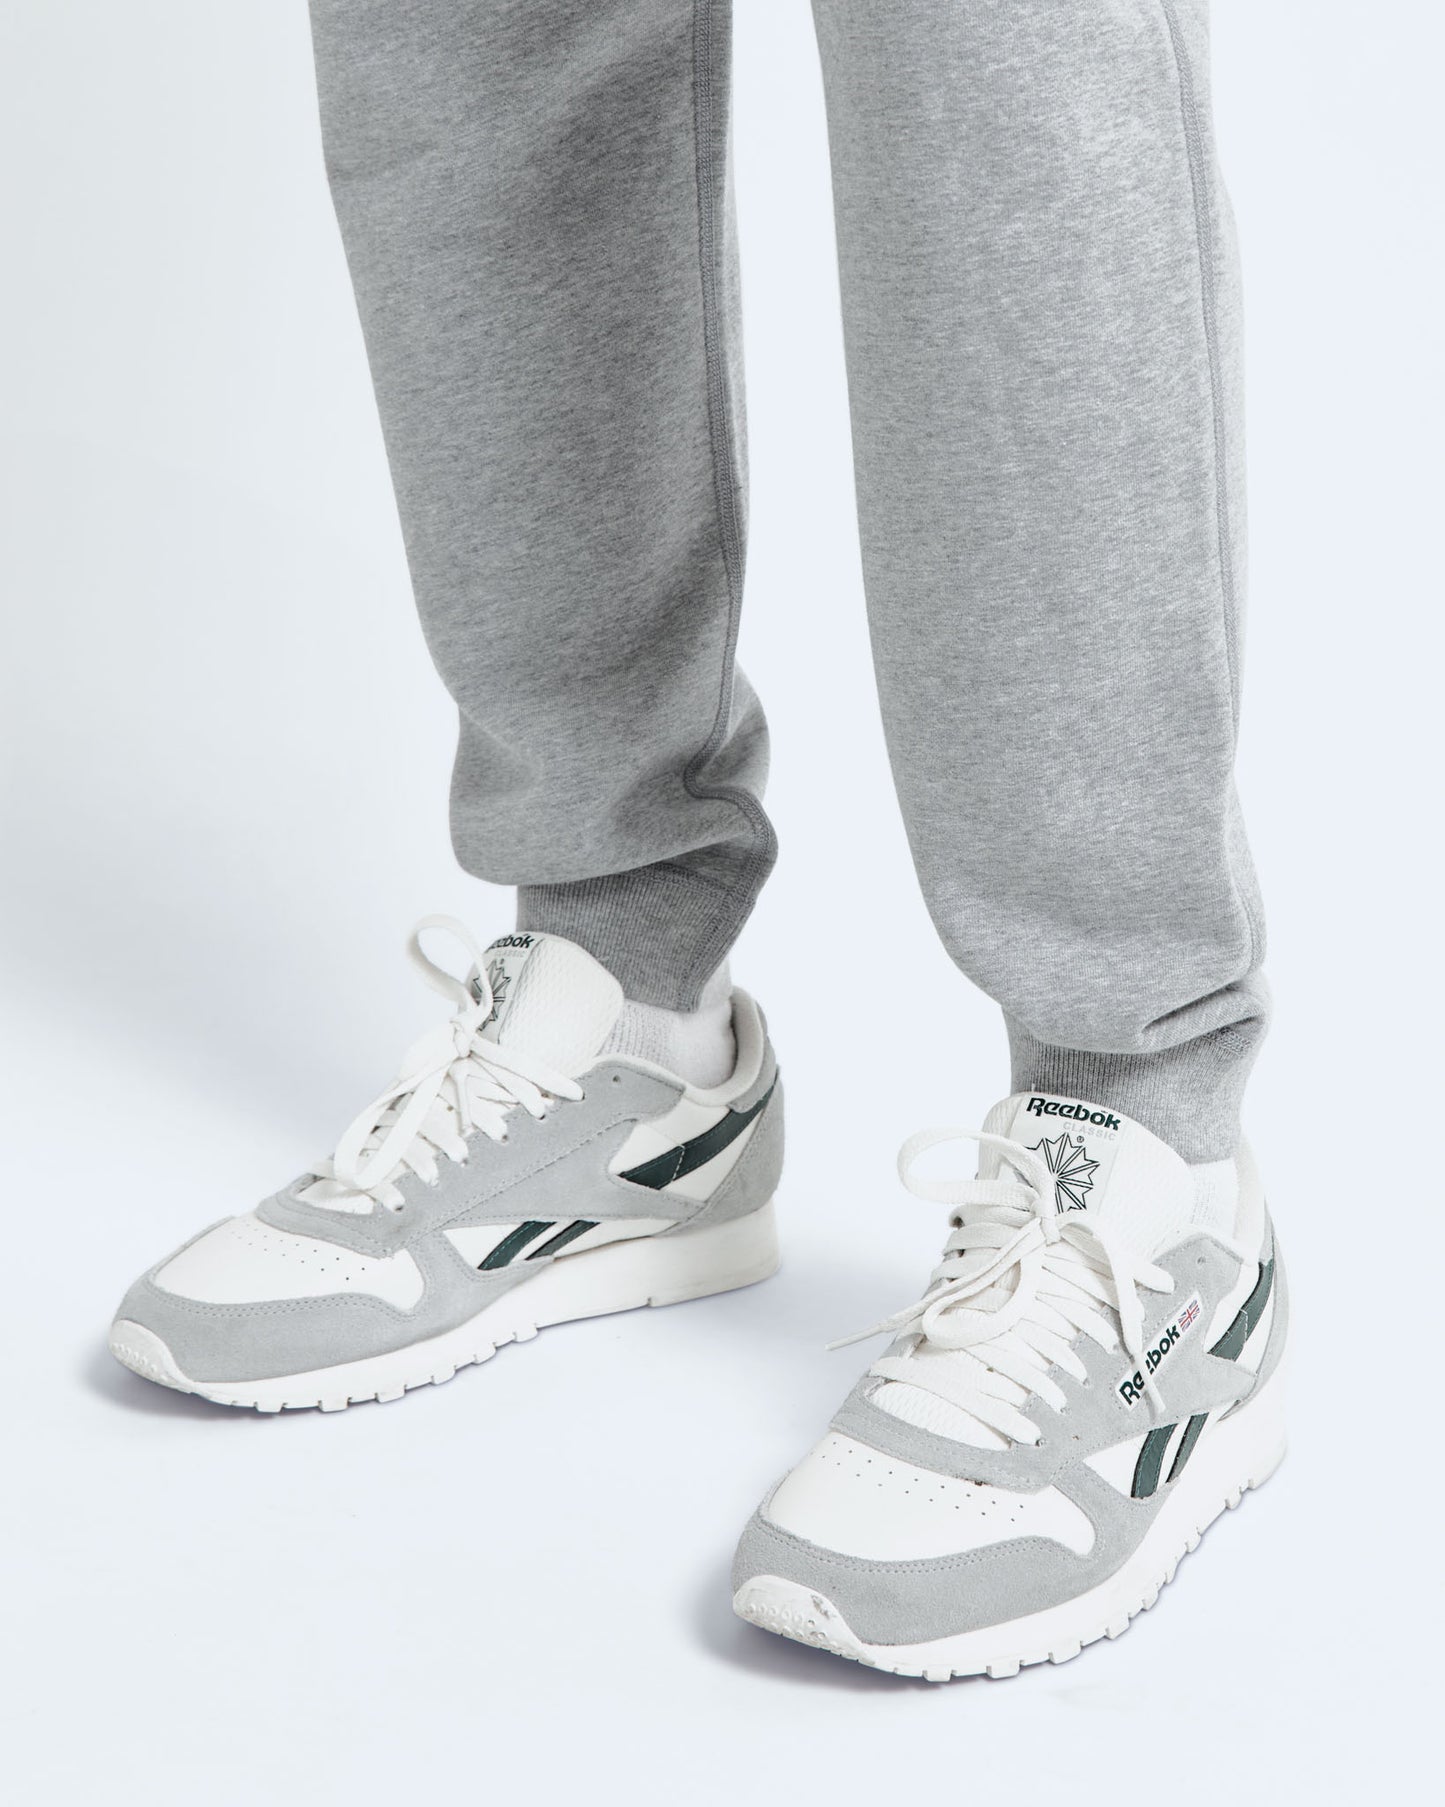 Midweight Terry Autograph Slim Sweatpant